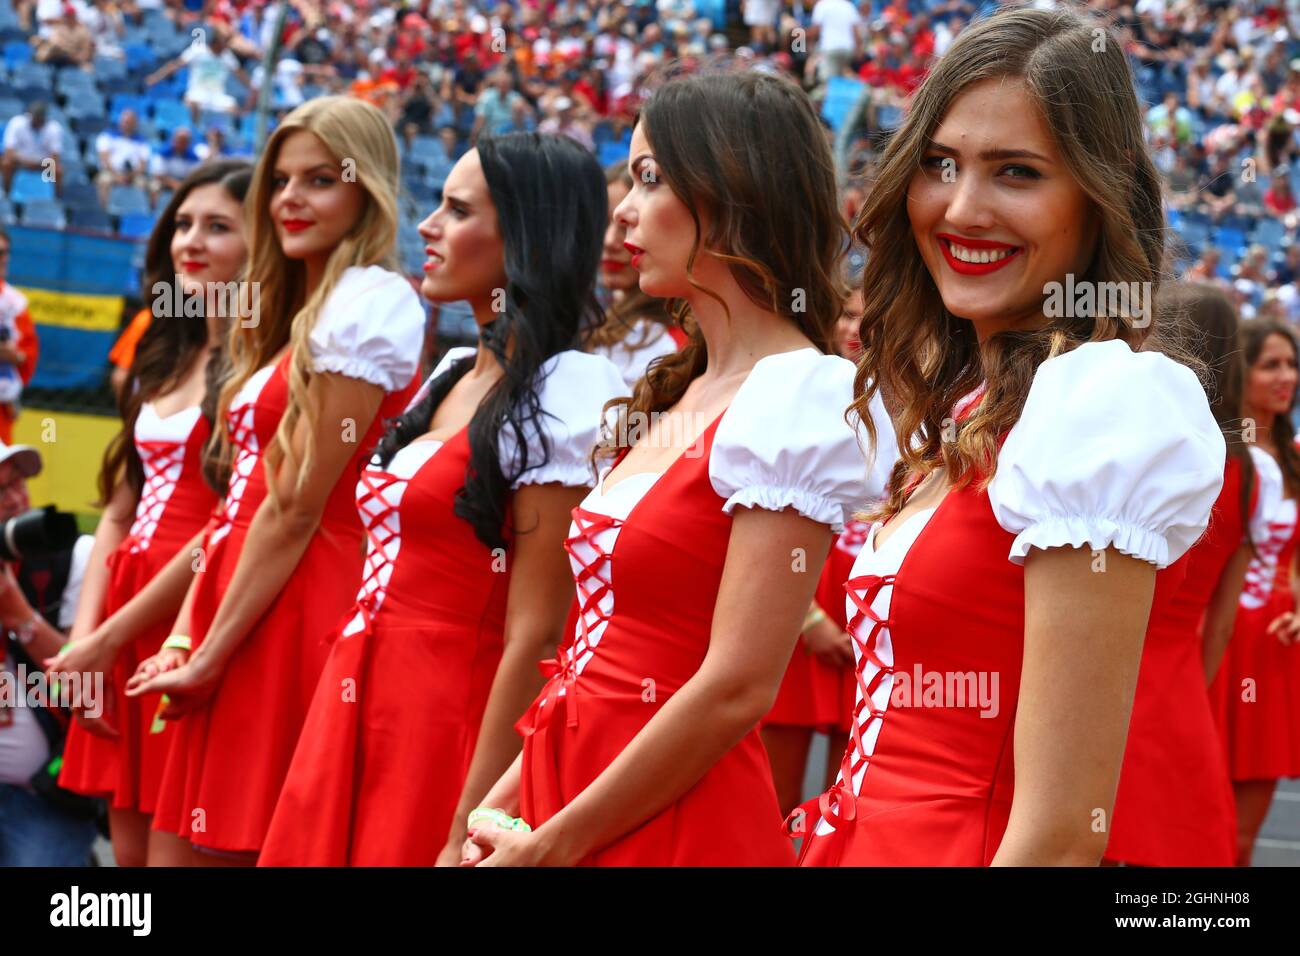 Grid Girls Budapest High Resolution Stock Photography and Images - Alamy